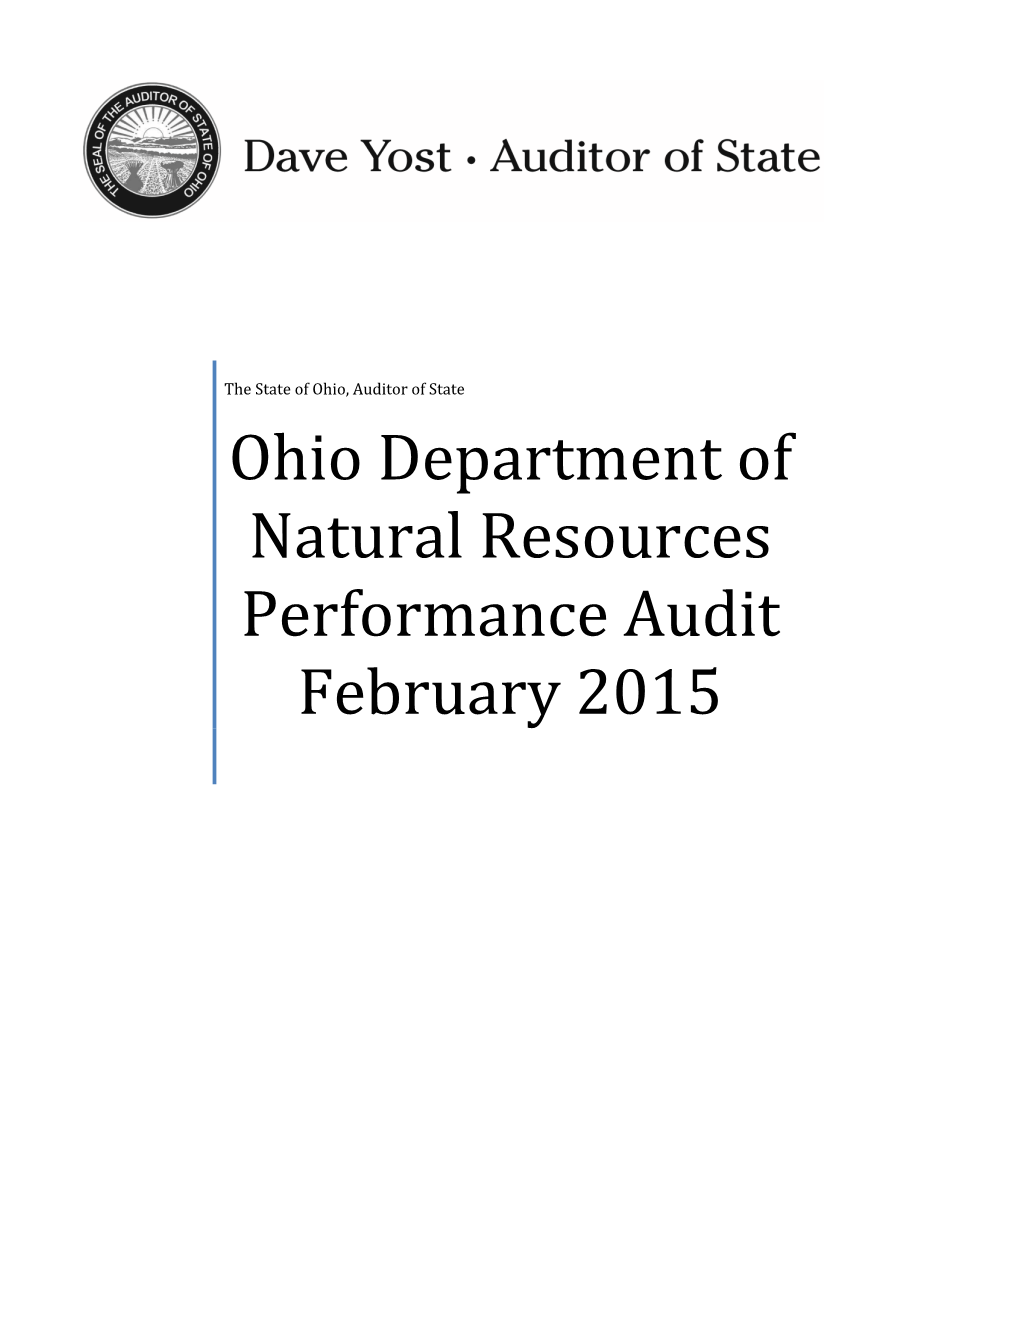 Ohio Department of Natural Resources Performance Audit February 2015